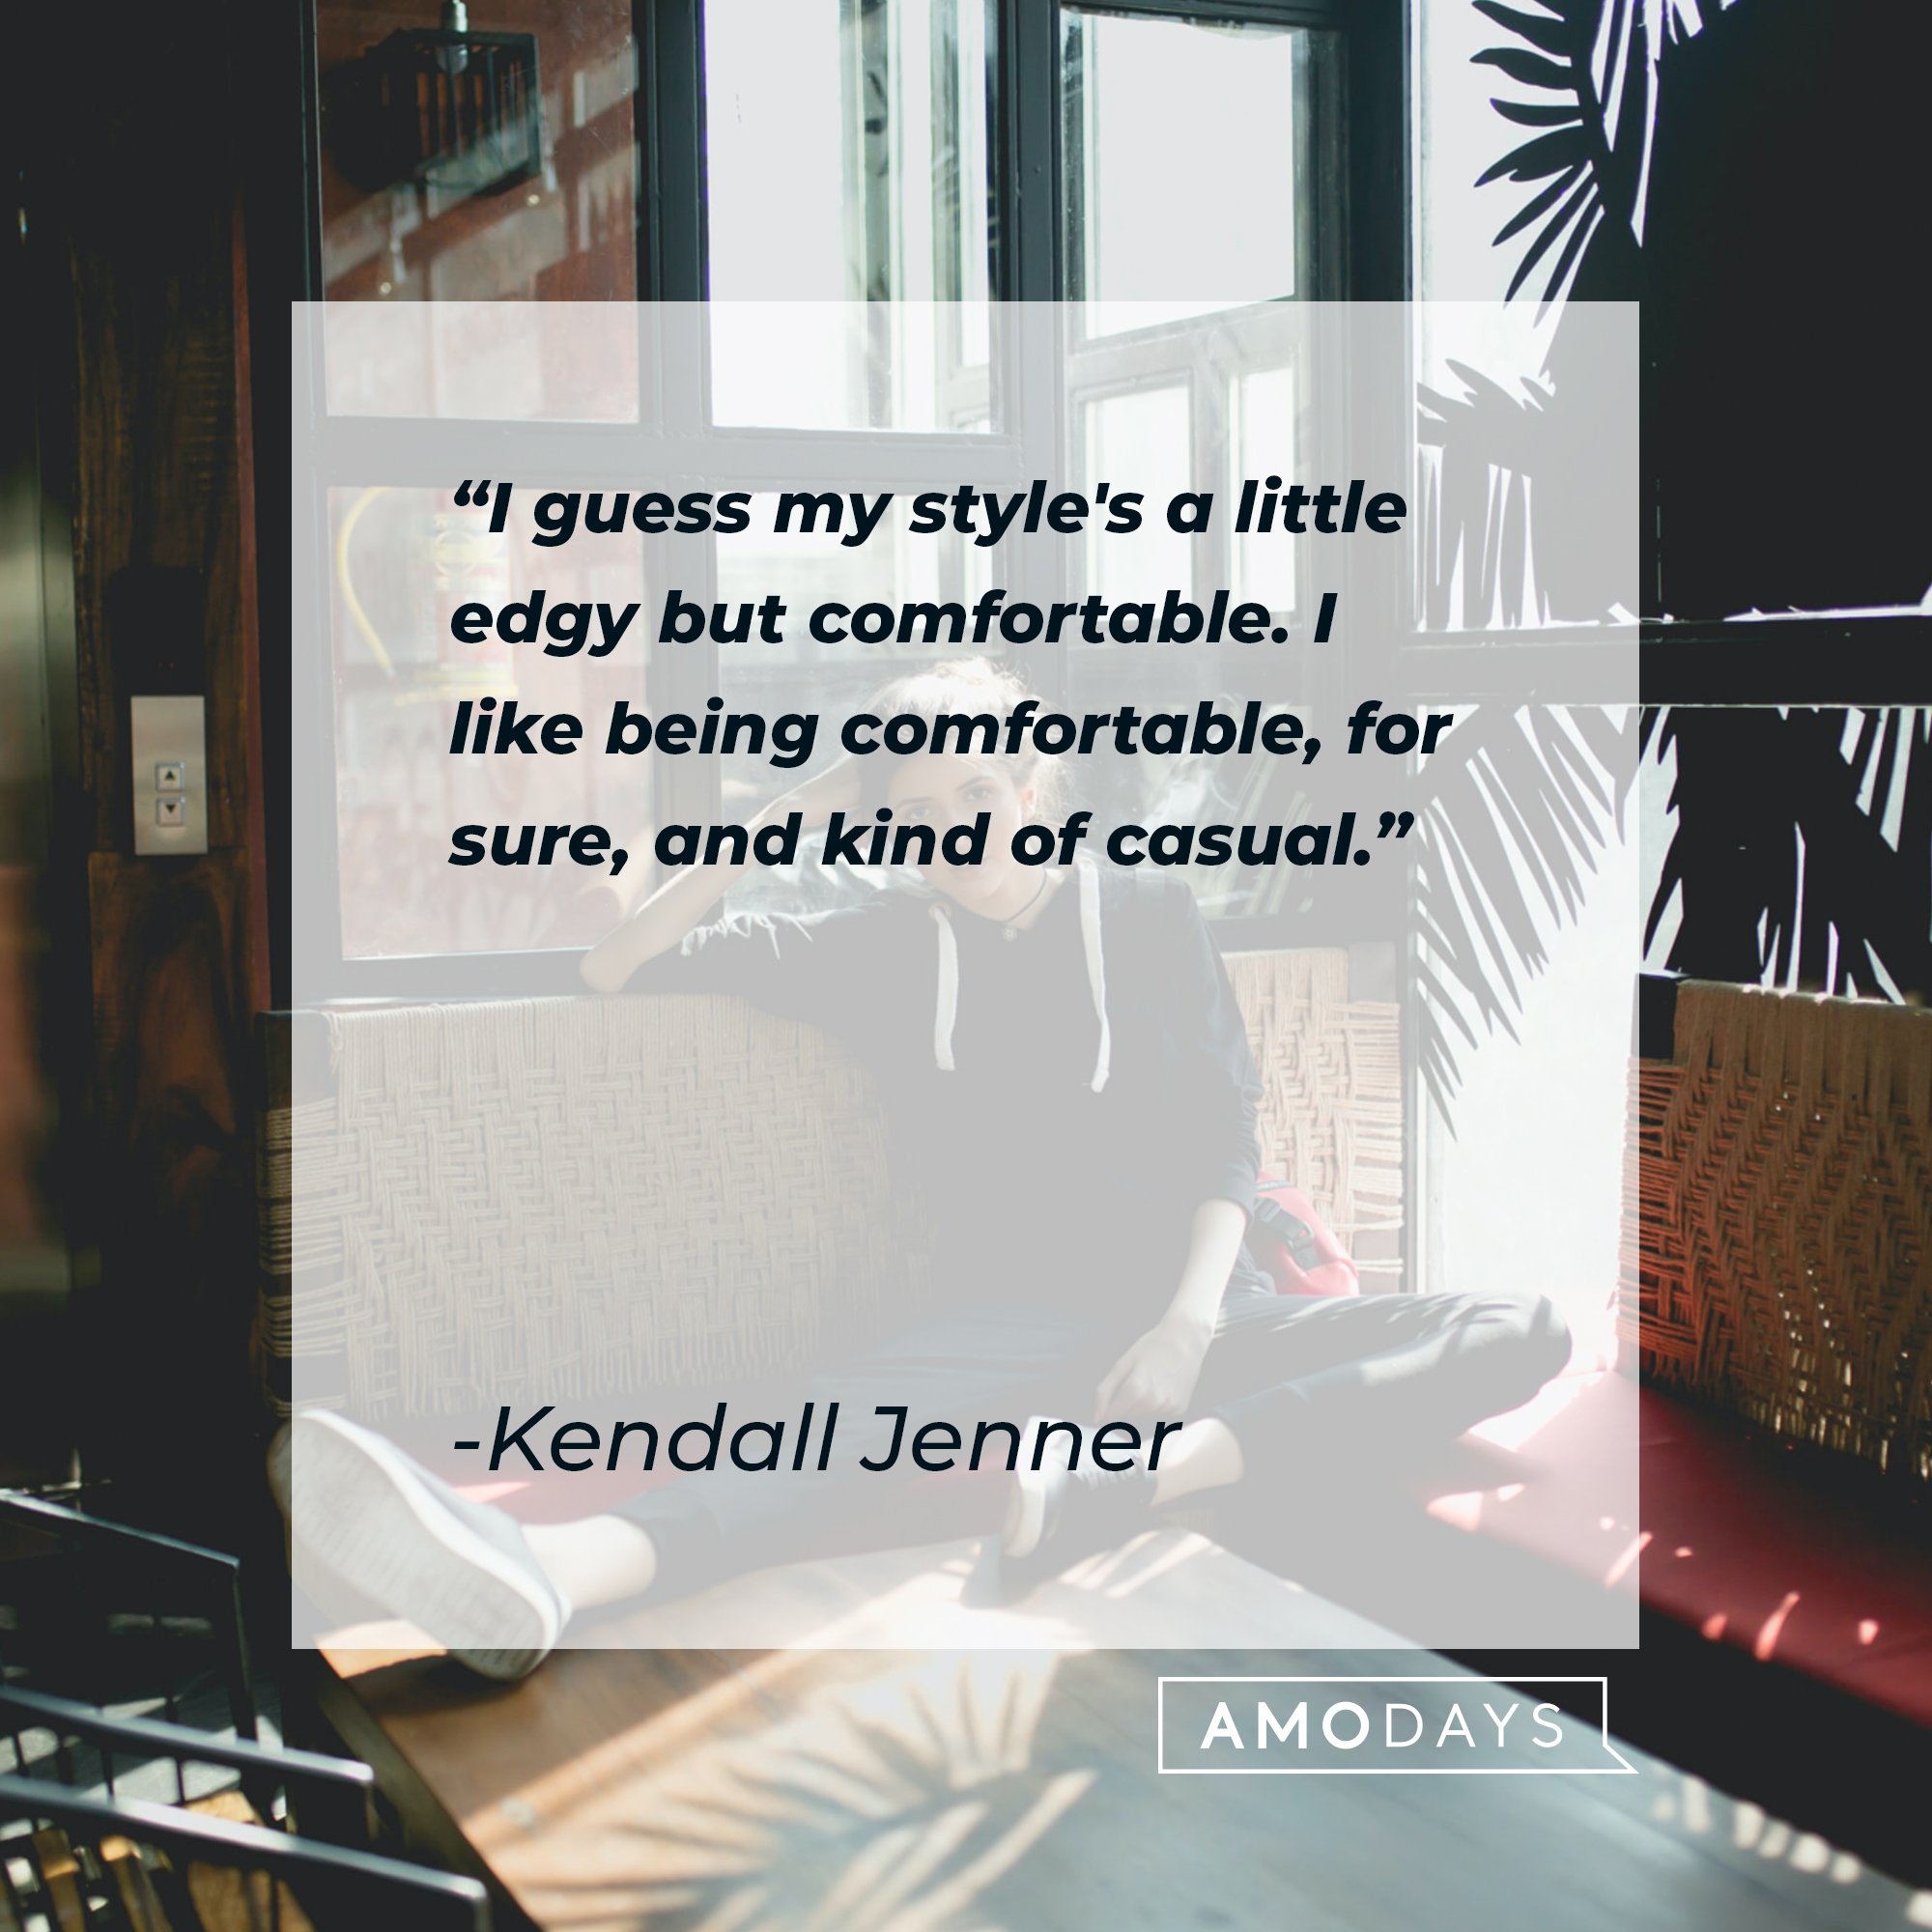 Kendall Jenner’s quote: "I guess my style's a little edgy but comfortable. I like being comfortable, for sure, and kind of casual." | Image: AmoDays